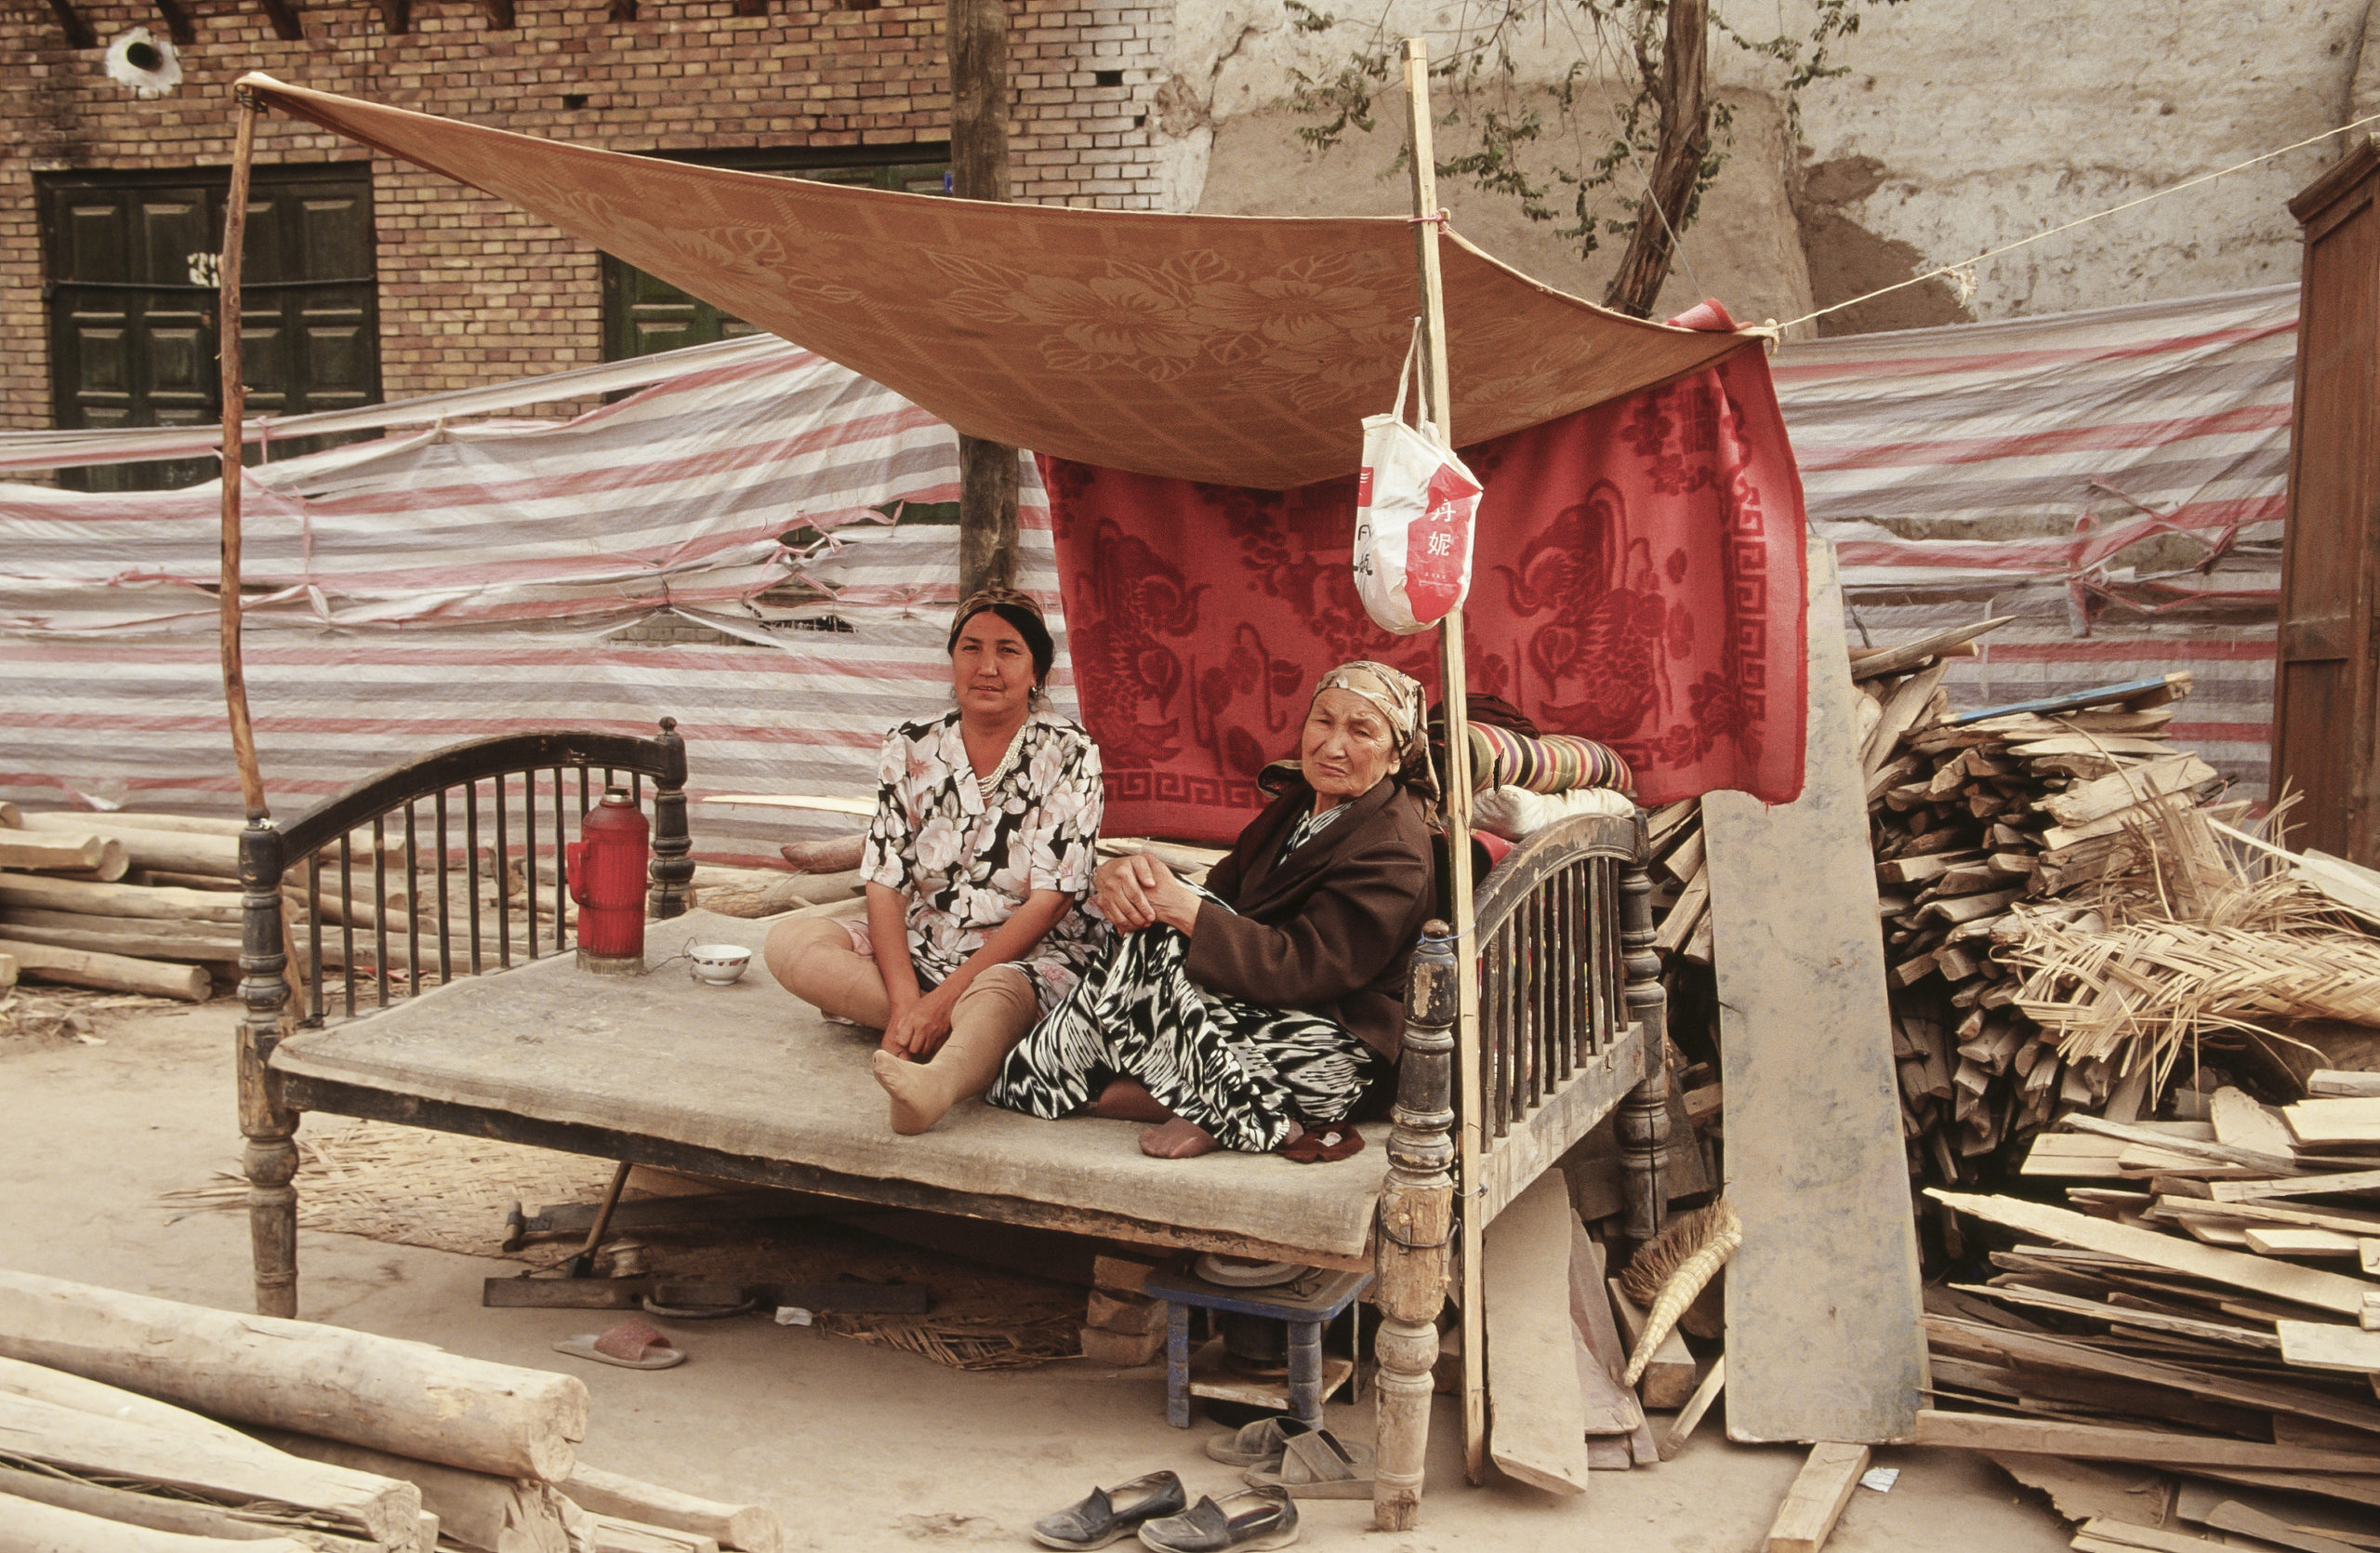 Kashgar image project, extended selection-69